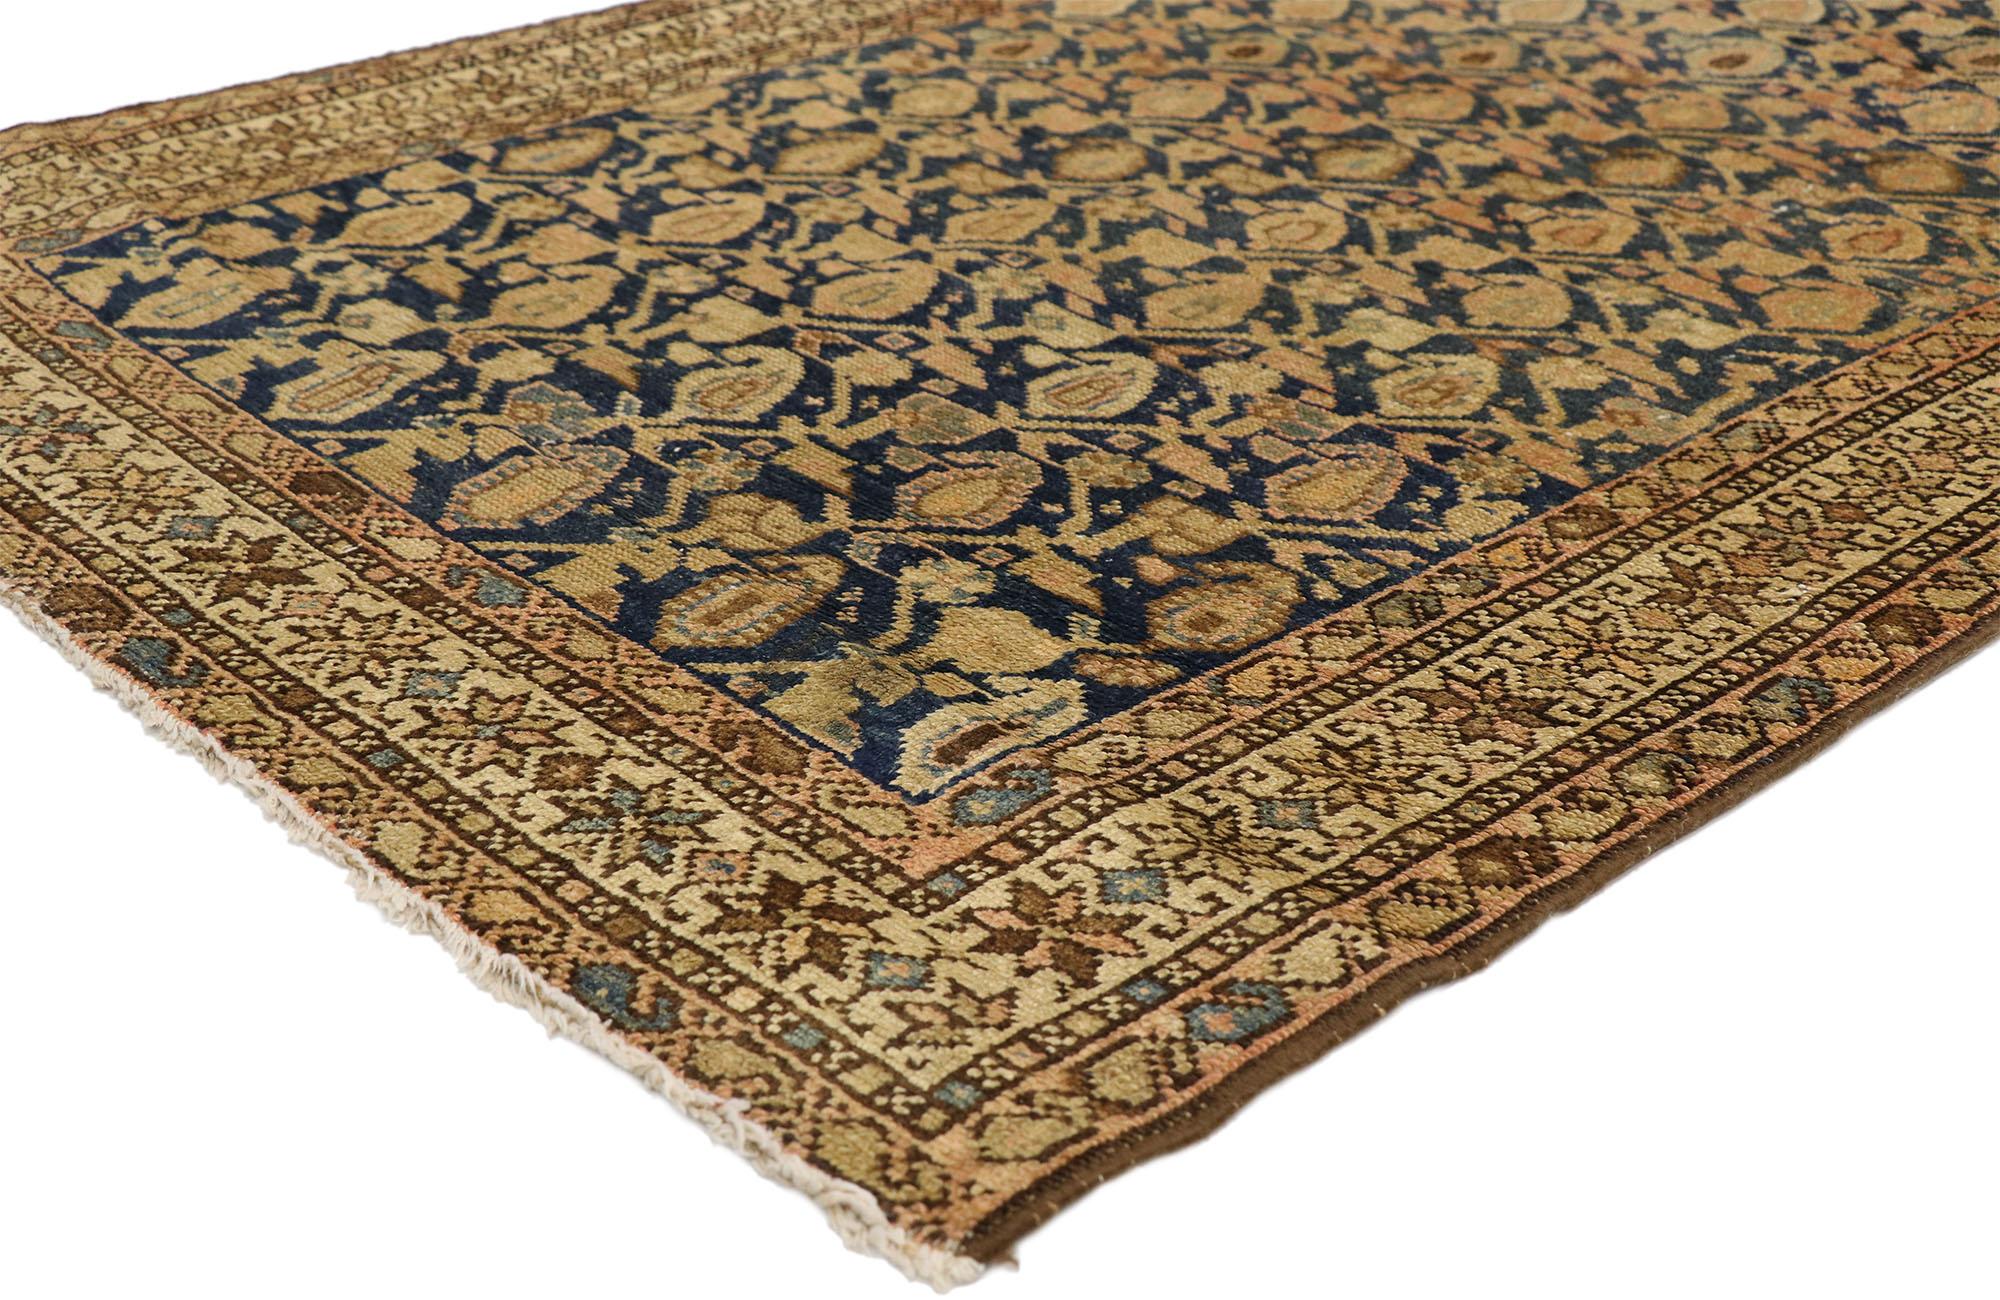 74234 Antique Persian Malayer Rug, 03'04 X 15'10.
Timeless elegance meets modern masculine in this hand knotted wool antique Persian Malayer rug. The imposing geometric design and sophisticated color palette woven into this piece work together